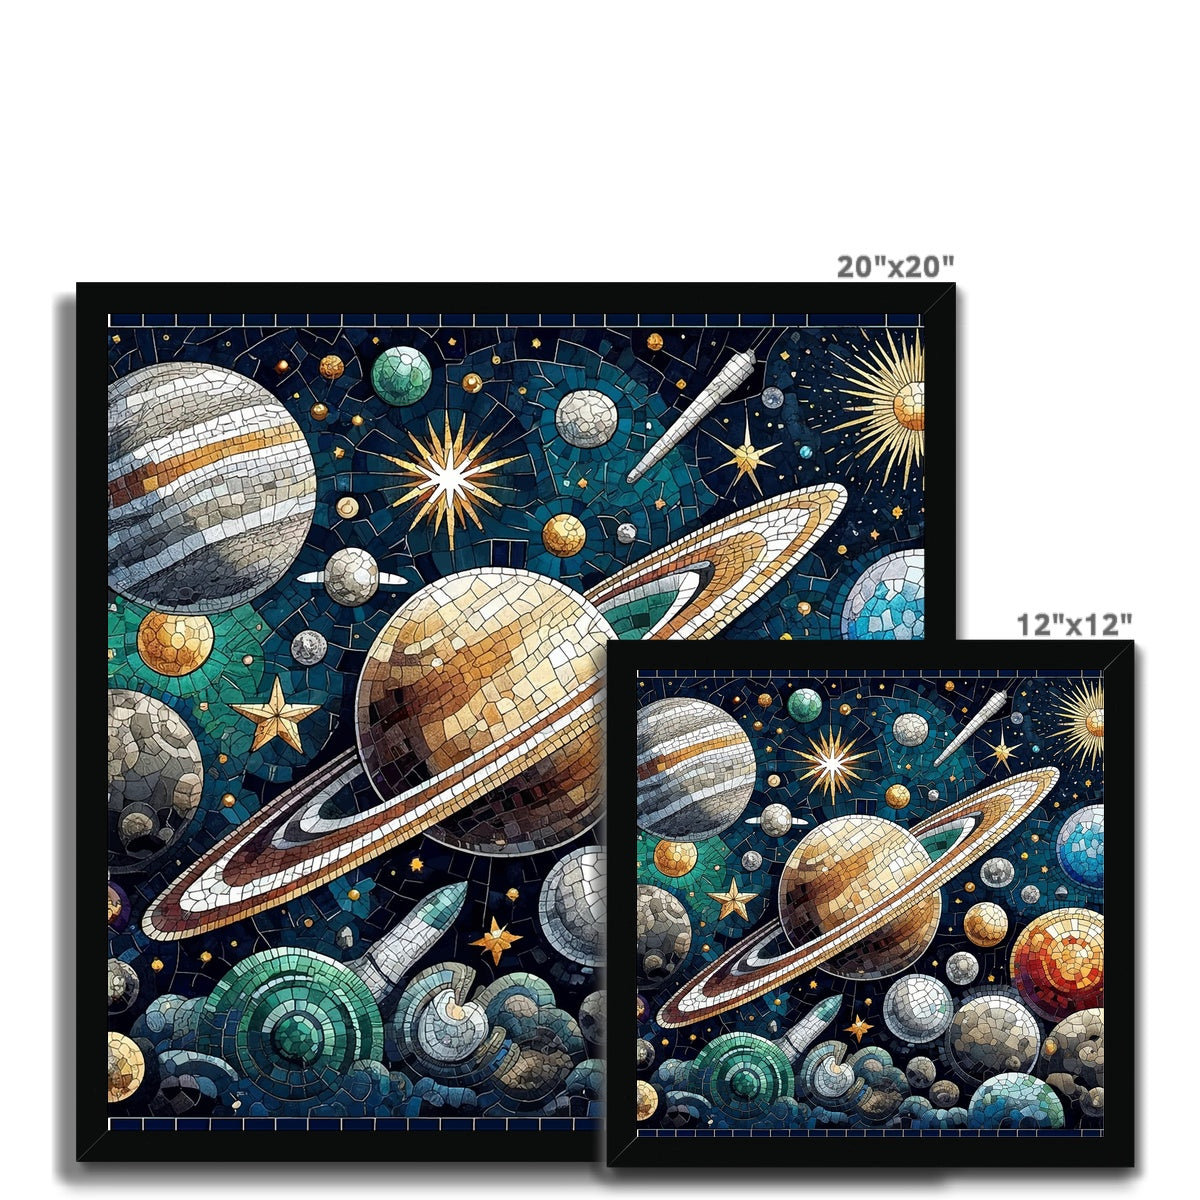 Space Mosaic Budget Framed Poster